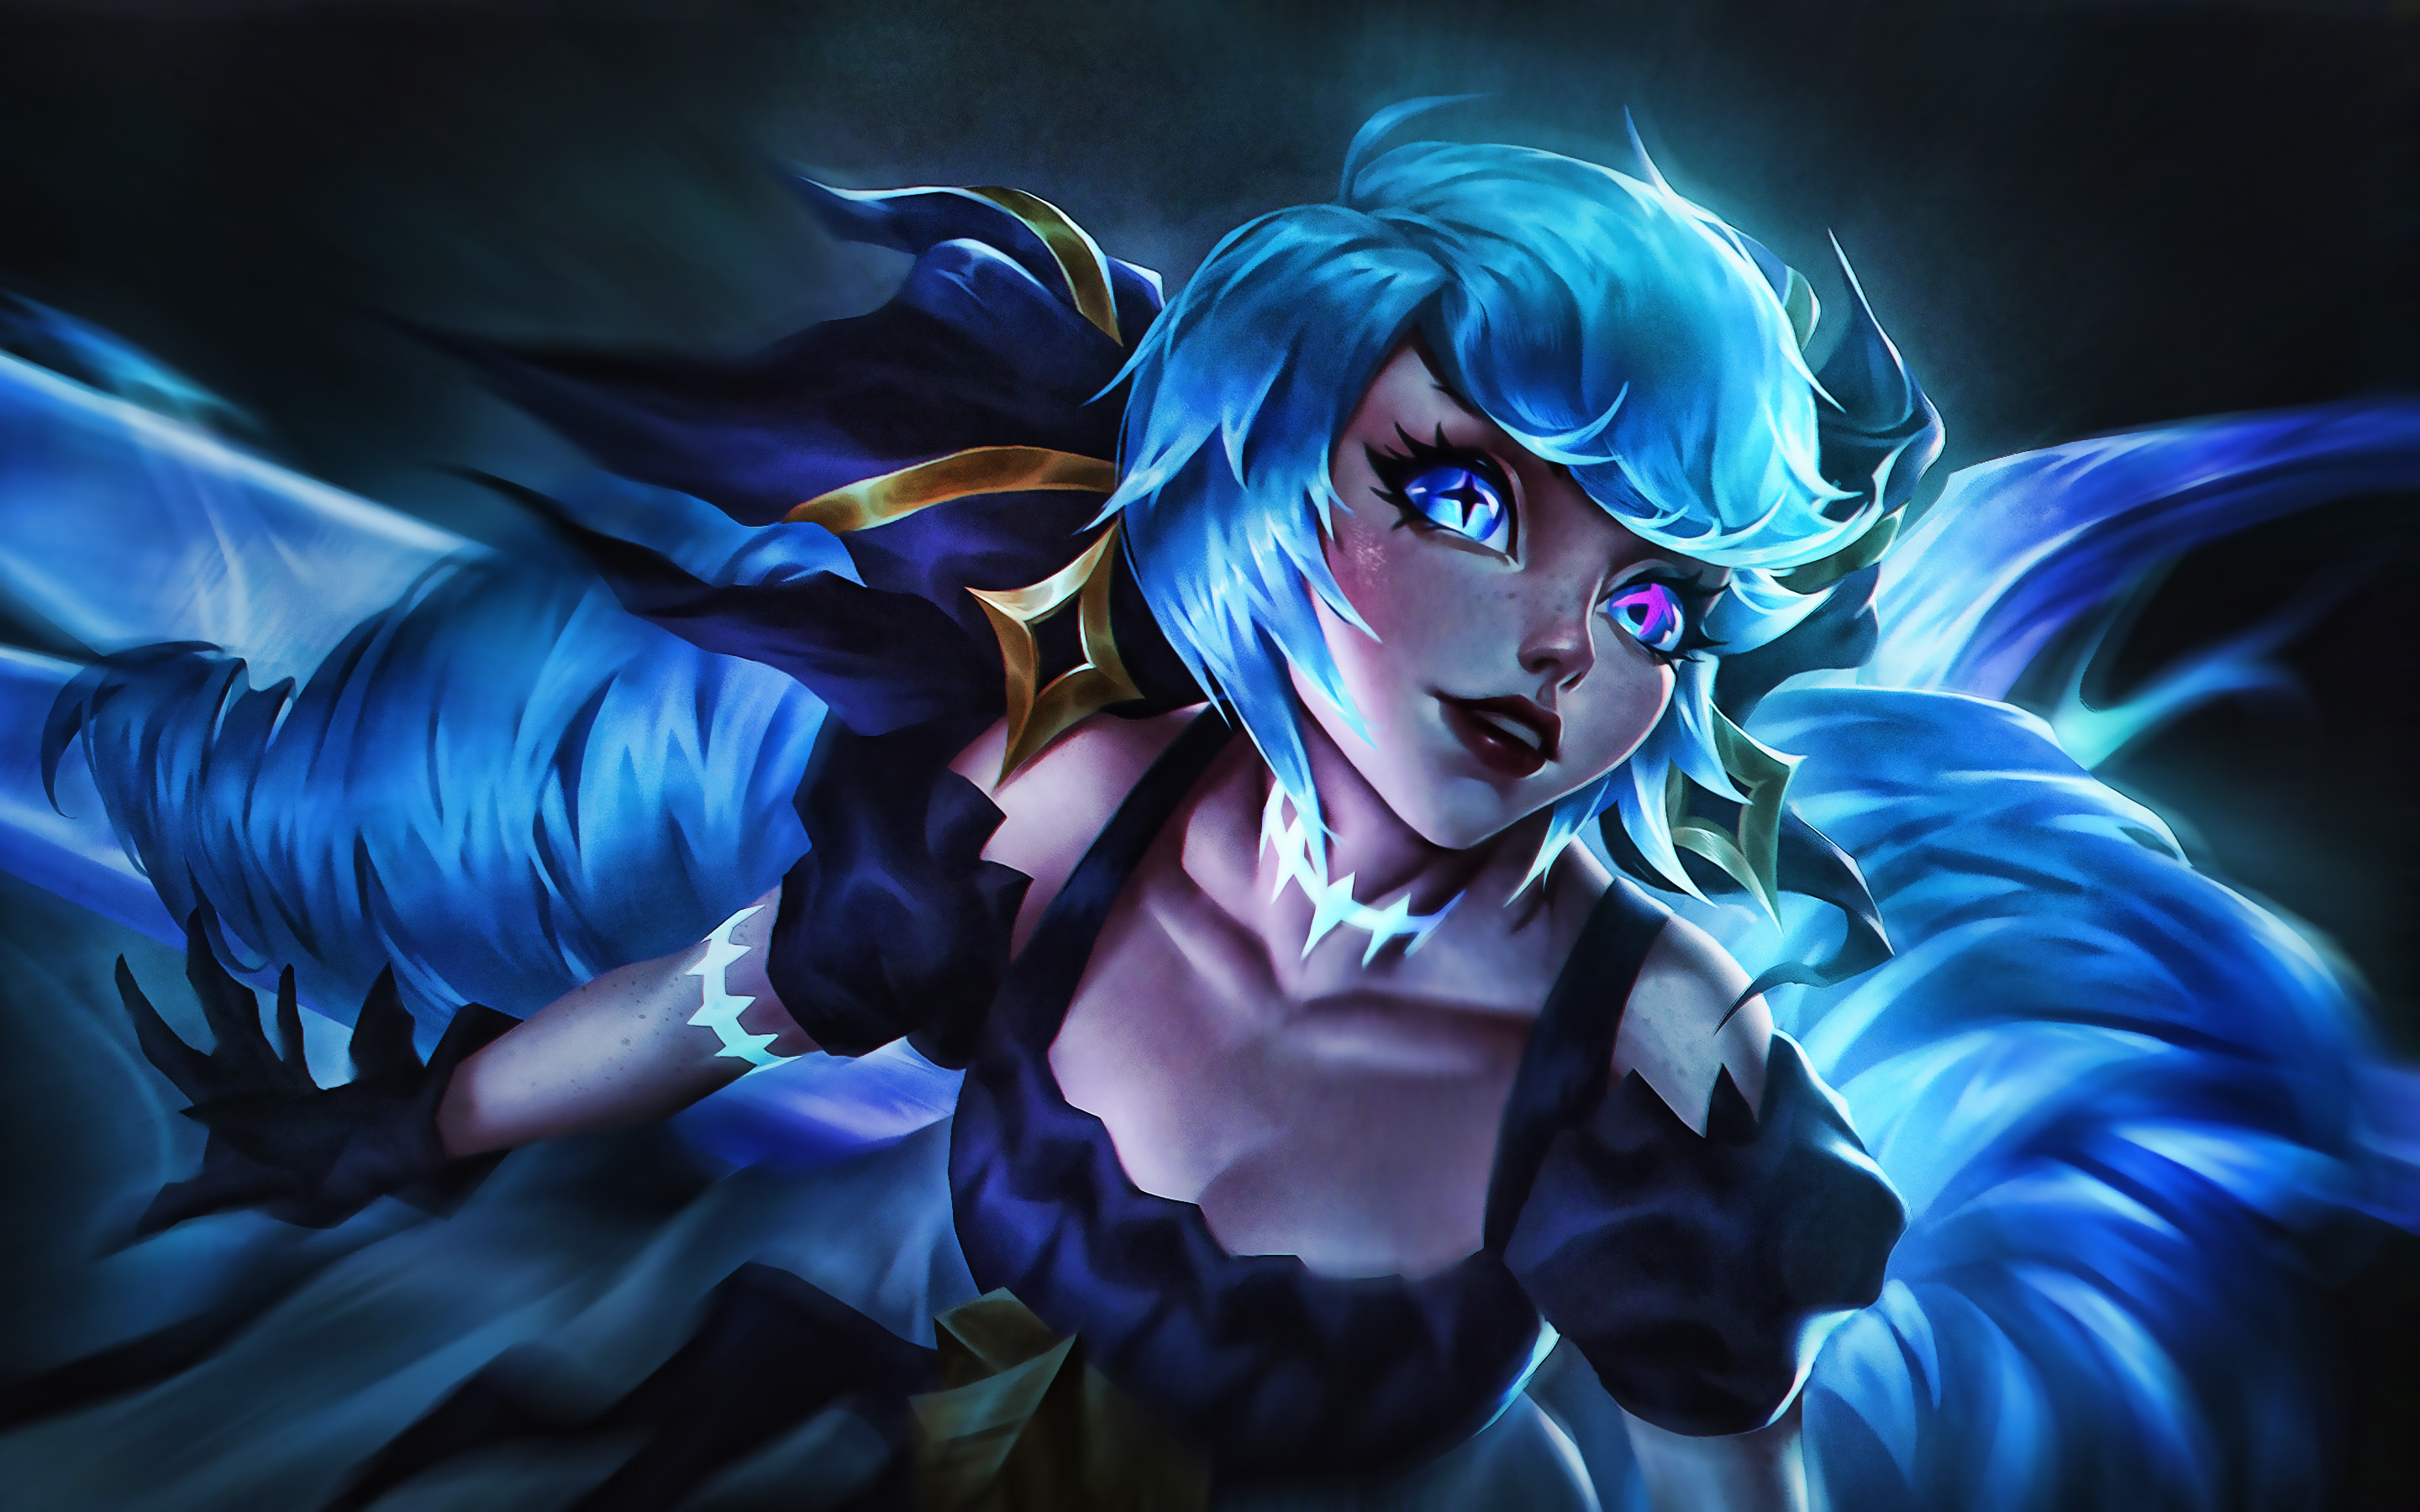 Download wallpapers Gwen night League of Legends MOBA LoL